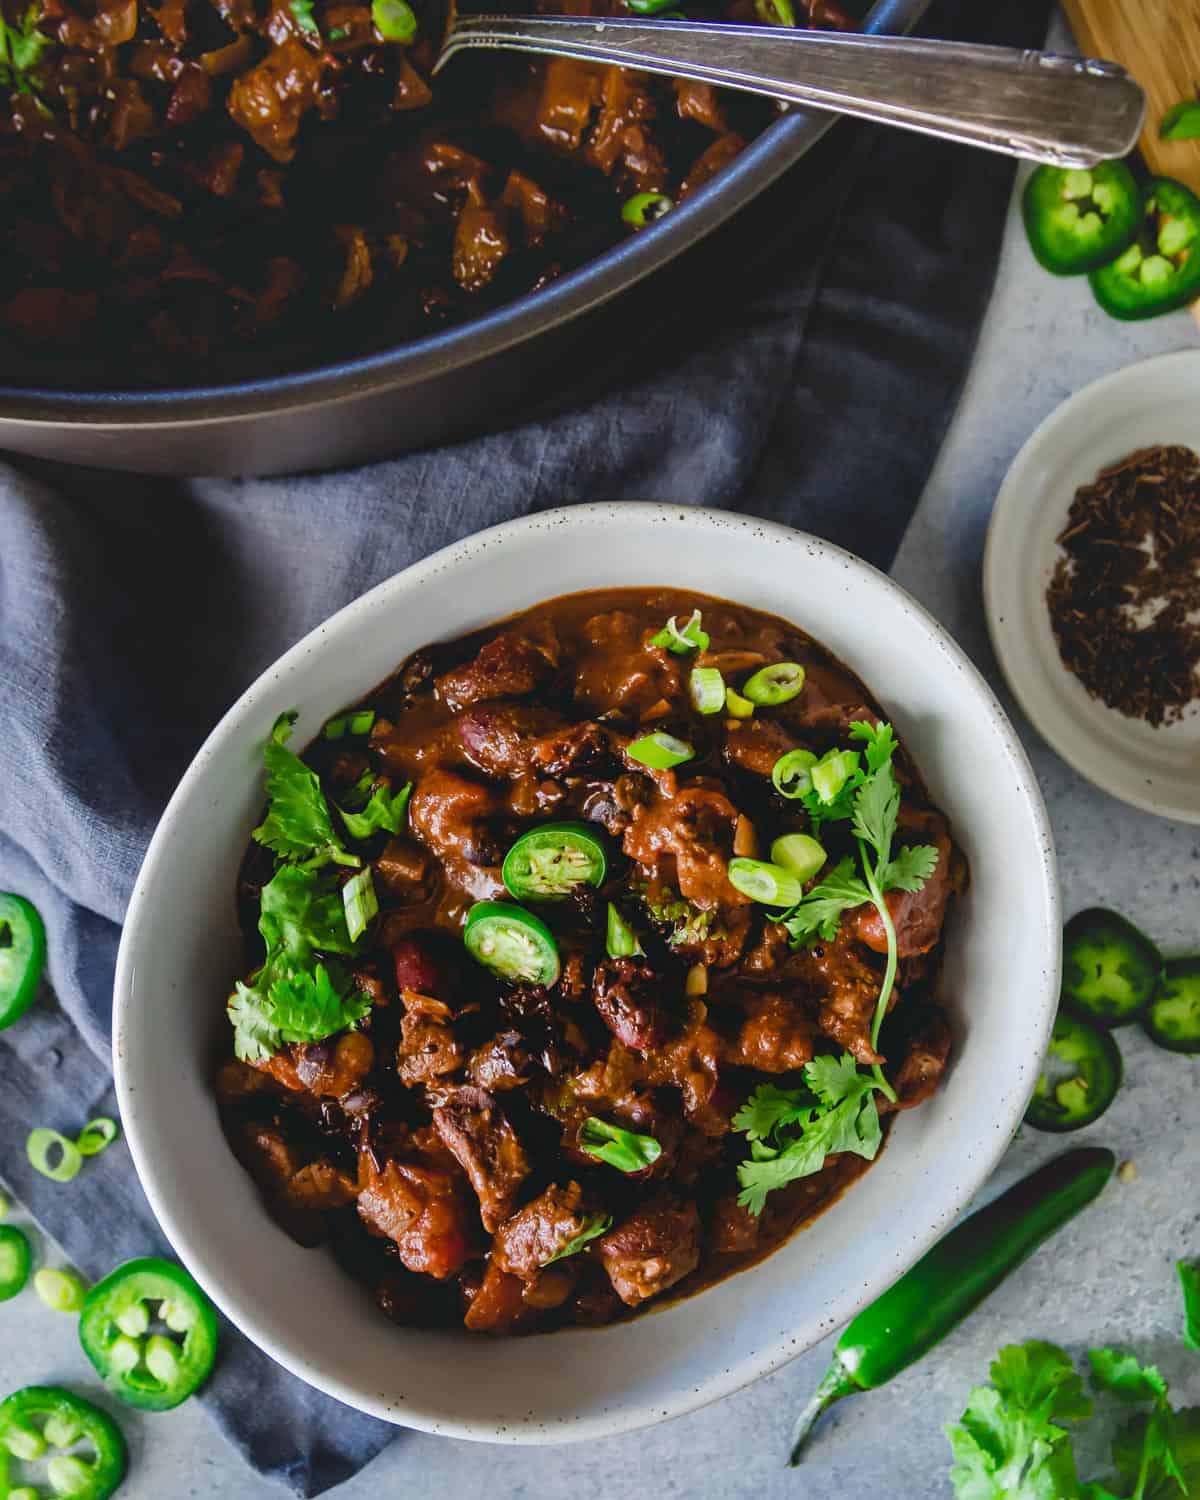 Try this chocolate chili with lamb for a unique spin on traditional chili.